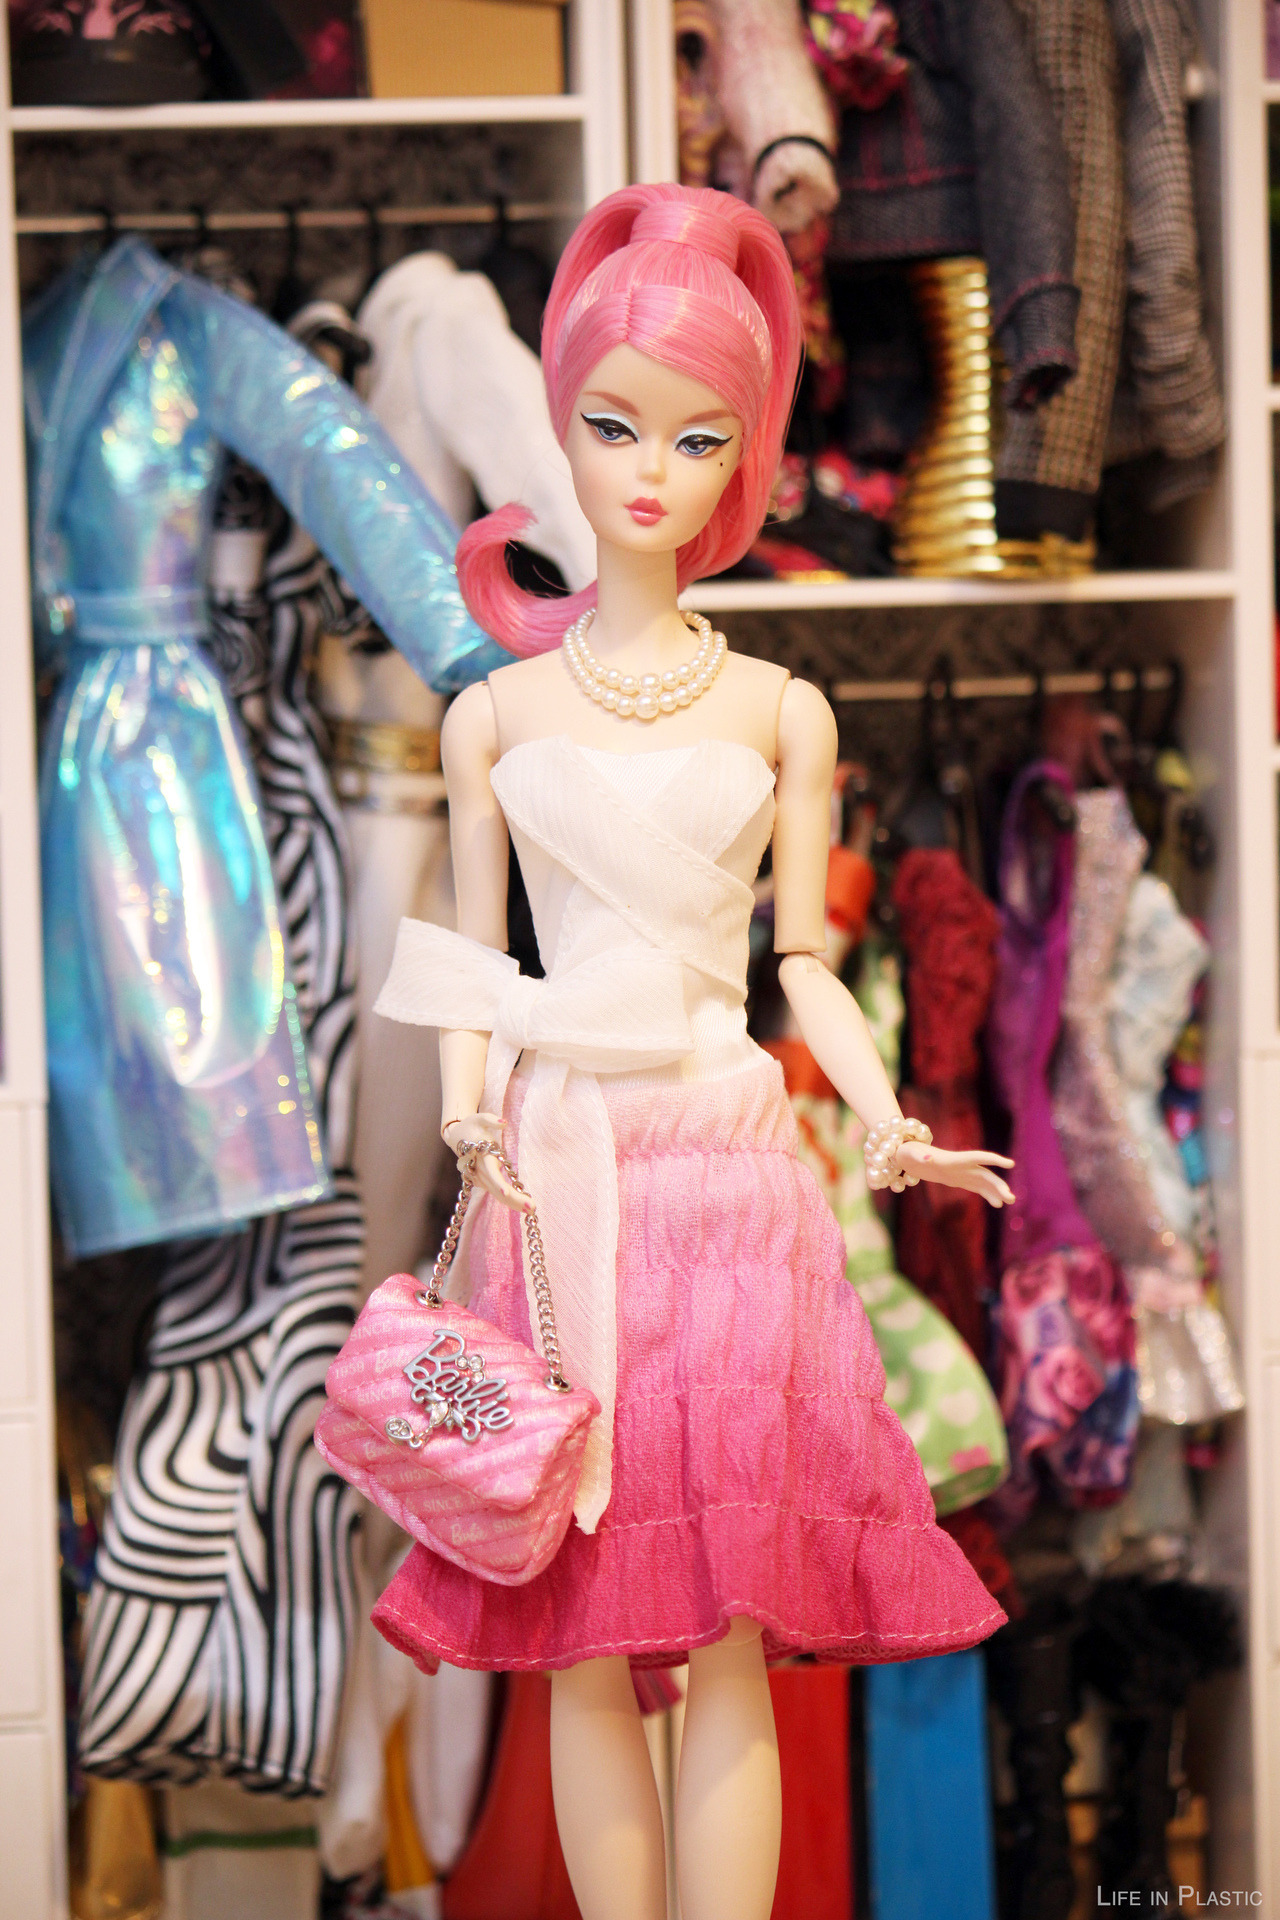 barbie proudly pink doll 2019